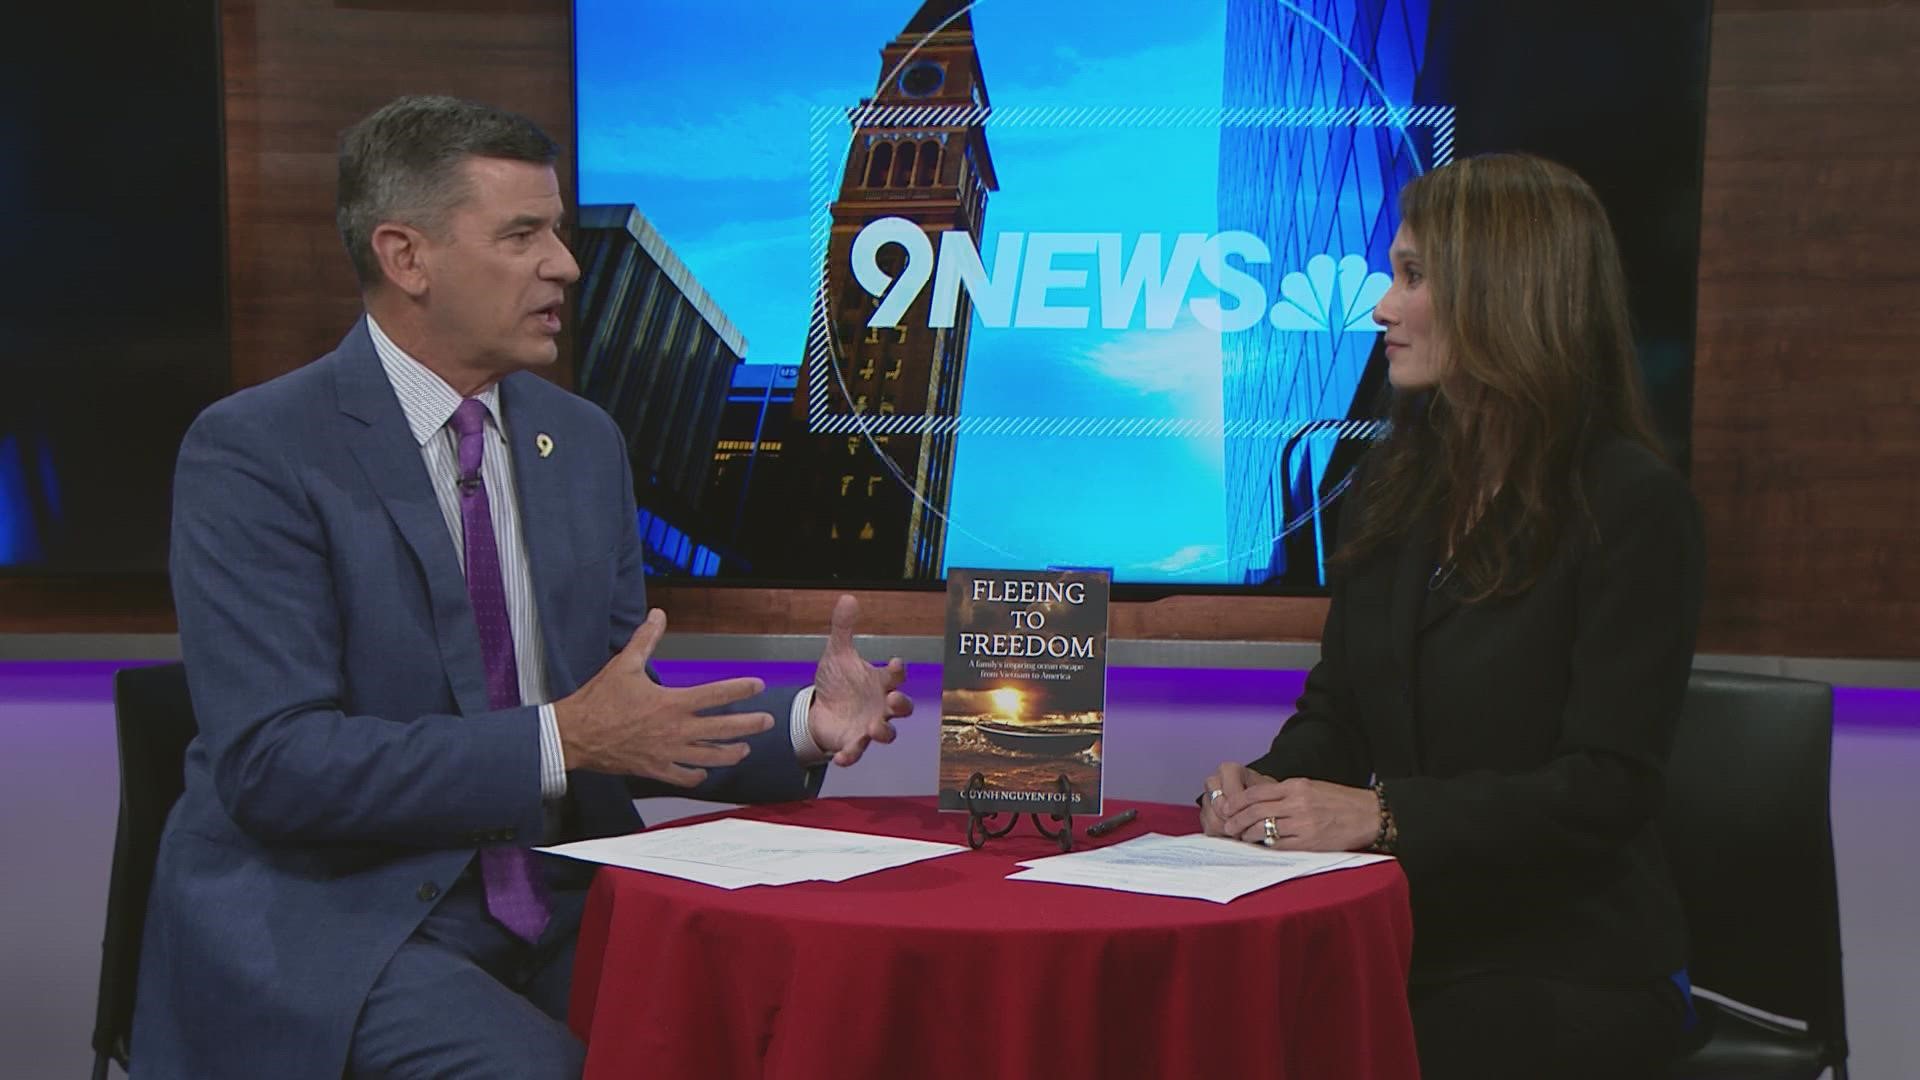 Former 9NEWS journalist Quynh Nguyen speaks about how her childhood inspired her to write her new book "Fleeing to Freedom"